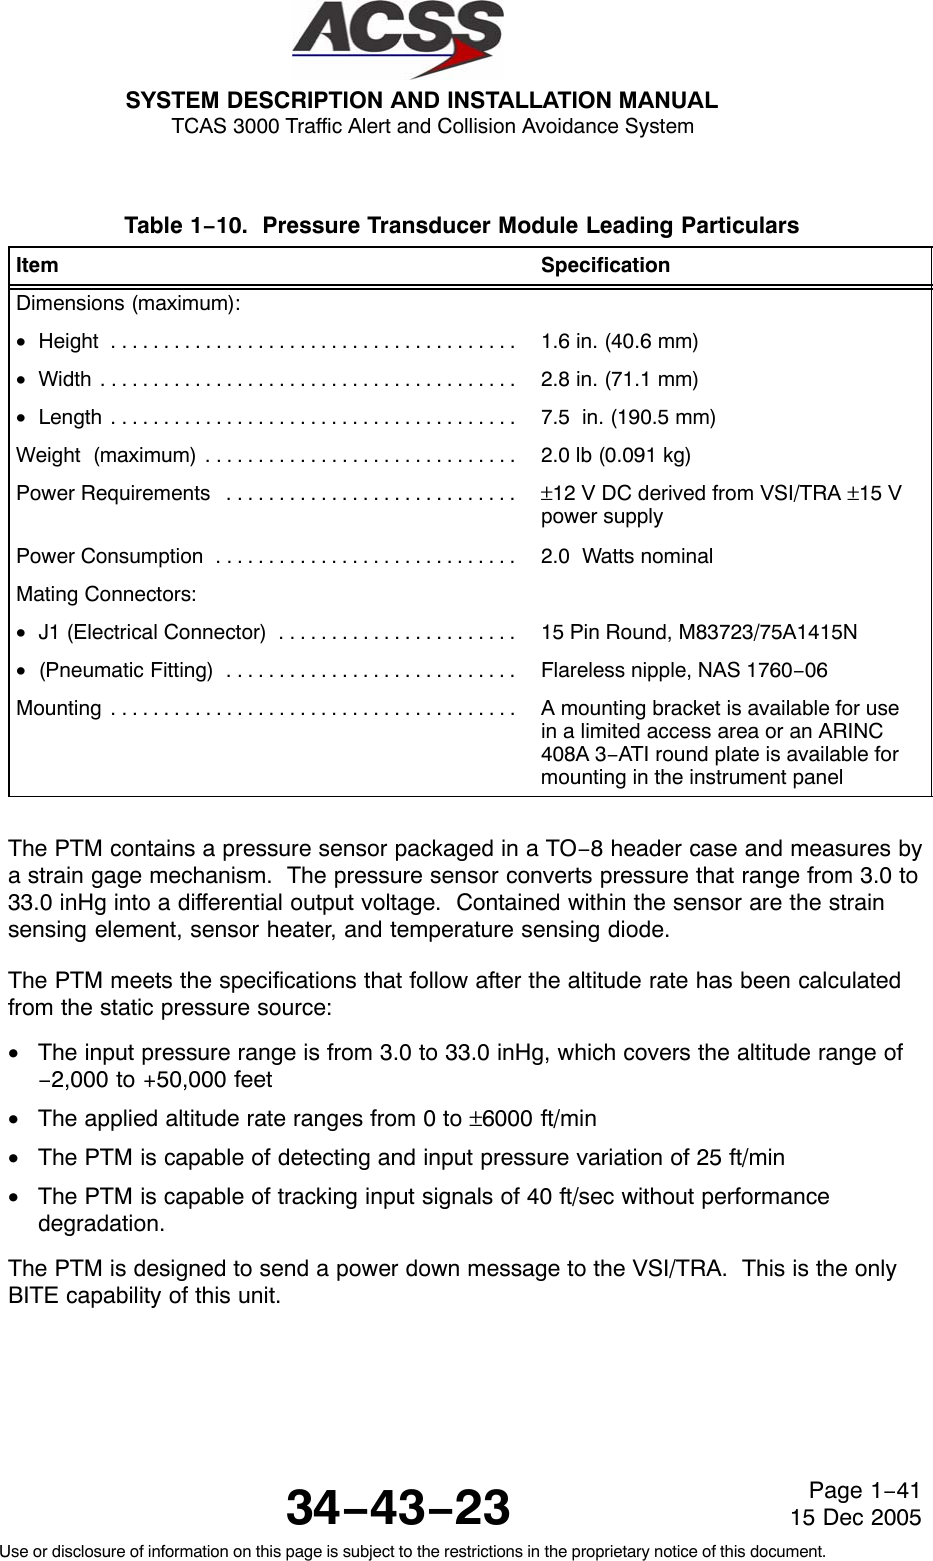 SYSTEM DESCRIPTION AND INSTALLATION MANUAL TCAS 3000 Traffic Alert and Collision Avoidance System34−43−23Use or disclosure of information on this page is subject to the restrictions in the proprietary notice of this document.Page 1−4115 Dec 2005Table 1−10.  Pressure Transducer Module Leading Particulars  Item SpecificationDimensions (maximum):•Height . . . . . . . . . . . . . . . . . . . . . . . . . . . . . . . . . . . . . . .  1.6 in. (40.6 mm)•Width . . . . . . . . . . . . . . . . . . . . . . . . . . . . . . . . . . . . . . . .  2.8 in. (71.1 mm)•Length . . . . . . . . . . . . . . . . . . . . . . . . . . . . . . . . . . . . . . .  7.5  in. (190.5 mm)Weight  (maximum) . . . . . . . . . . . . . . . . . . . . . . . . . . . . . .  2.0 lb (0.091 kg)Power Requirements . . . . . . . . . . . . . . . . . . . . . . . . . . . .  ±12 V DC derived from VSI/TRA ±15 Vpower supplyPower Consumption . . . . . . . . . . . . . . . . . . . . . . . . . . . . .  2.0  Watts nominalMating Connectors:•J1 (Electrical Connector) . . . . . . . . . . . . . . . . . . . . . . .  15 Pin Round, M83723/75A1415N•(Pneumatic Fitting) . . . . . . . . . . . . . . . . . . . . . . . . . . . .  Flareless nipple, NAS 1760−06Mounting . . . . . . . . . . . . . . . . . . . . . . . . . . . . . . . . . . . . . . .  A mounting bracket is available for usein a limited access area or an ARINC408A 3−ATI round plate is available formounting in the instrument panelThe PTM contains a pressure sensor packaged in a TO−8 header case and measures bya strain gage mechanism.  The pressure sensor converts pressure that range from 3.0 to33.0 inHg into a differential output voltage.  Contained within the sensor are the strainsensing element, sensor heater, and temperature sensing diode.The PTM meets the specifications that follow after the altitude rate has been calculatedfrom the static pressure source:•The input pressure range is from 3.0 to 33.0 inHg, which covers the altitude range of−2,000 to +50,000 feet•The applied altitude rate ranges from 0 to ±6000 ft/min•The PTM is capable of detecting and input pressure variation of 25 ft/min•The PTM is capable of tracking input signals of 40 ft/sec without performancedegradation.The PTM is designed to send a power down message to the VSI/TRA.  This is the onlyBITE capability of this unit.